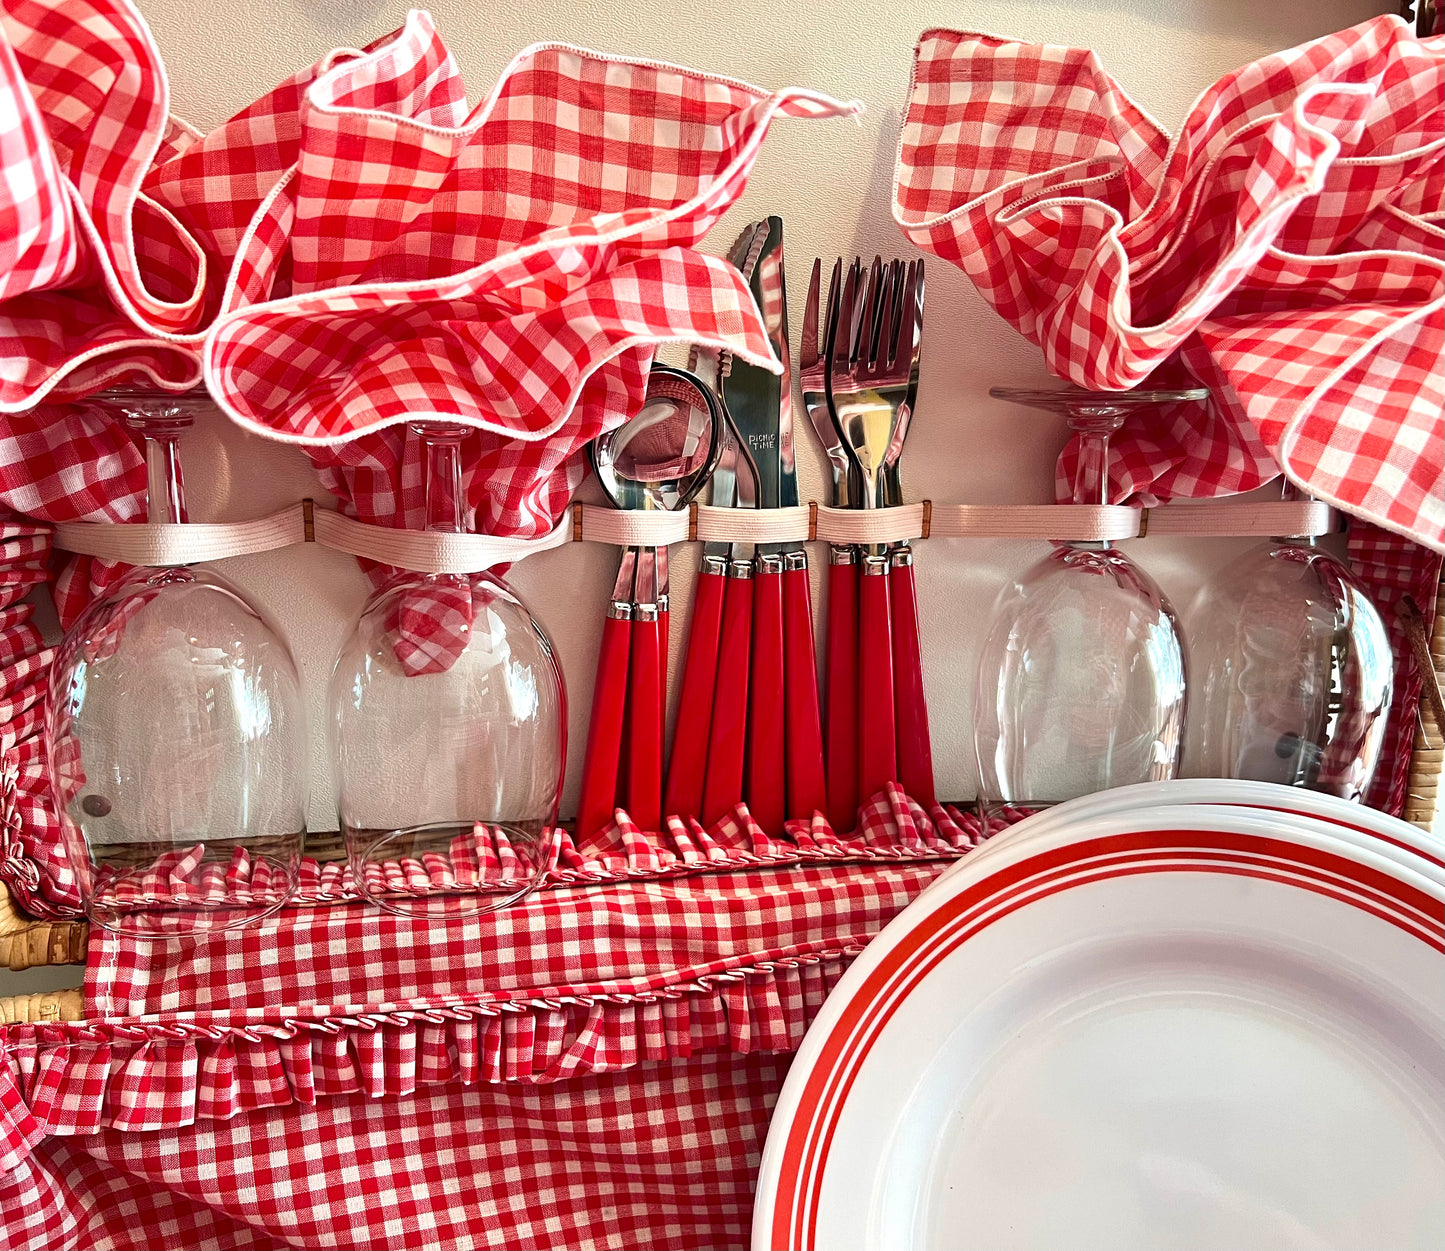 Picnic Basket Set with Red and White Gingham, 1980s by Picnic Time with Original Tag